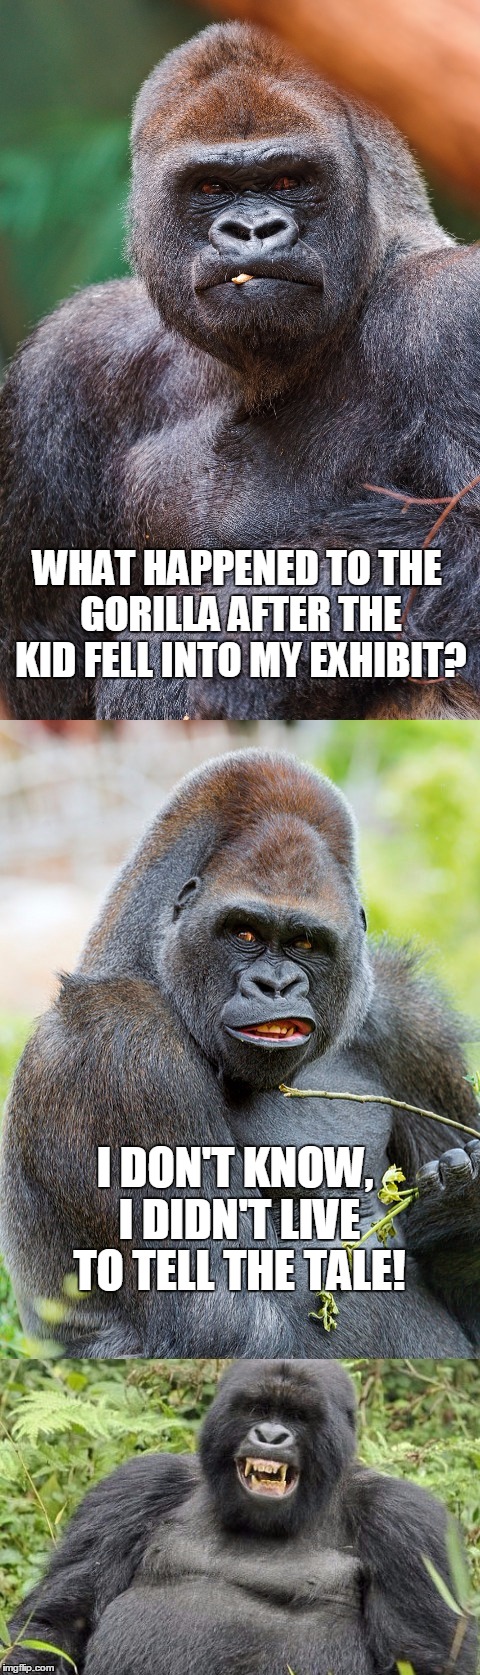 Bad Pun Gorilla | WHAT HAPPENED TO THE GORILLA AFTER THE KID FELL INTO MY EXHIBIT? I DON'T KNOW, I DIDN'T LIVE TO TELL THE TALE! | image tagged in bad pun gorilla | made w/ Imgflip meme maker